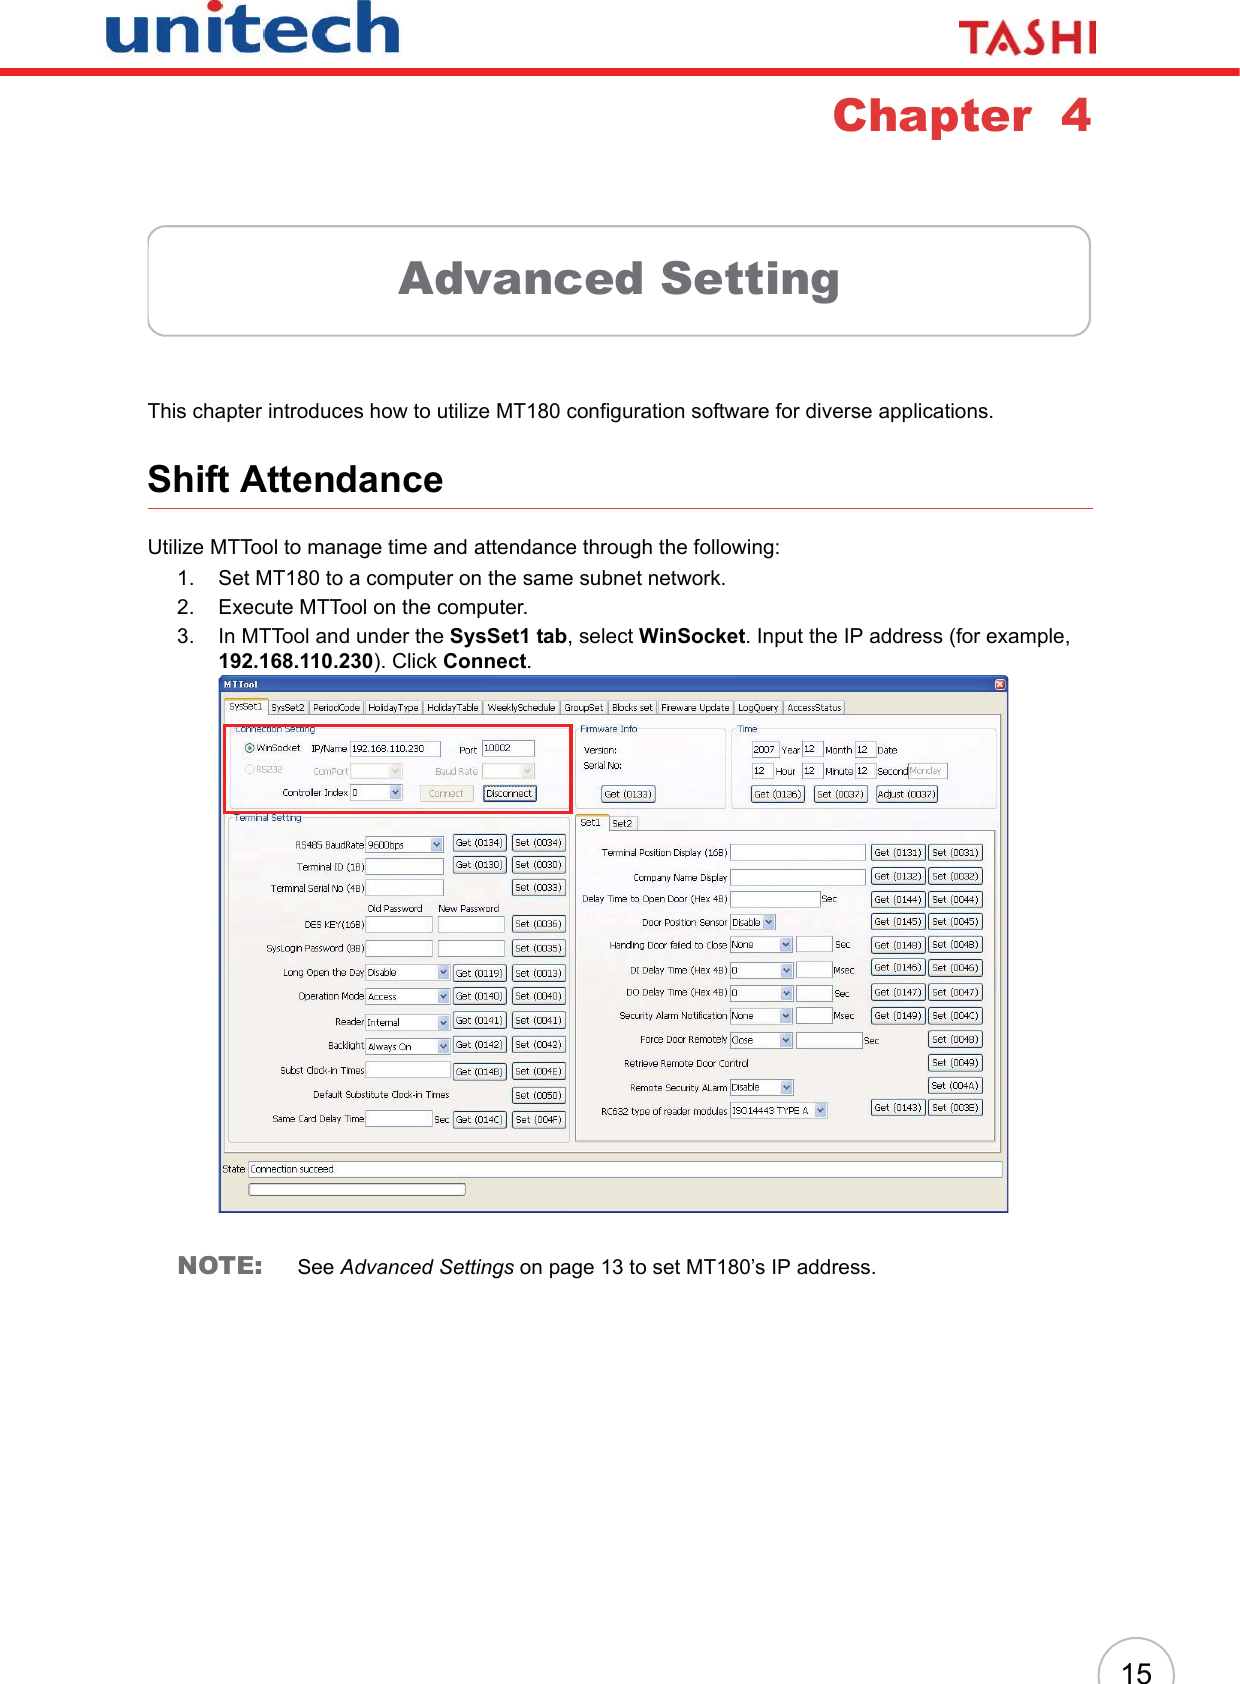 15Chapter  4Advanced SettingThis chapter introduces how to utilize MT180 configuration software for diverse applications.Shift AttendanceUtilize MTTool to manage time and attendance through the following:1. Set MT180 to a computer on the same subnet network.2. Execute MTTool on the computer.3. In MTTool and under the SysSet1 tab, select WinSocket. Input the IP address (for example, 192.168.110.230). Click Connect.NOTE: See Advanced Settings on page 13 to set MT180’s IP address.